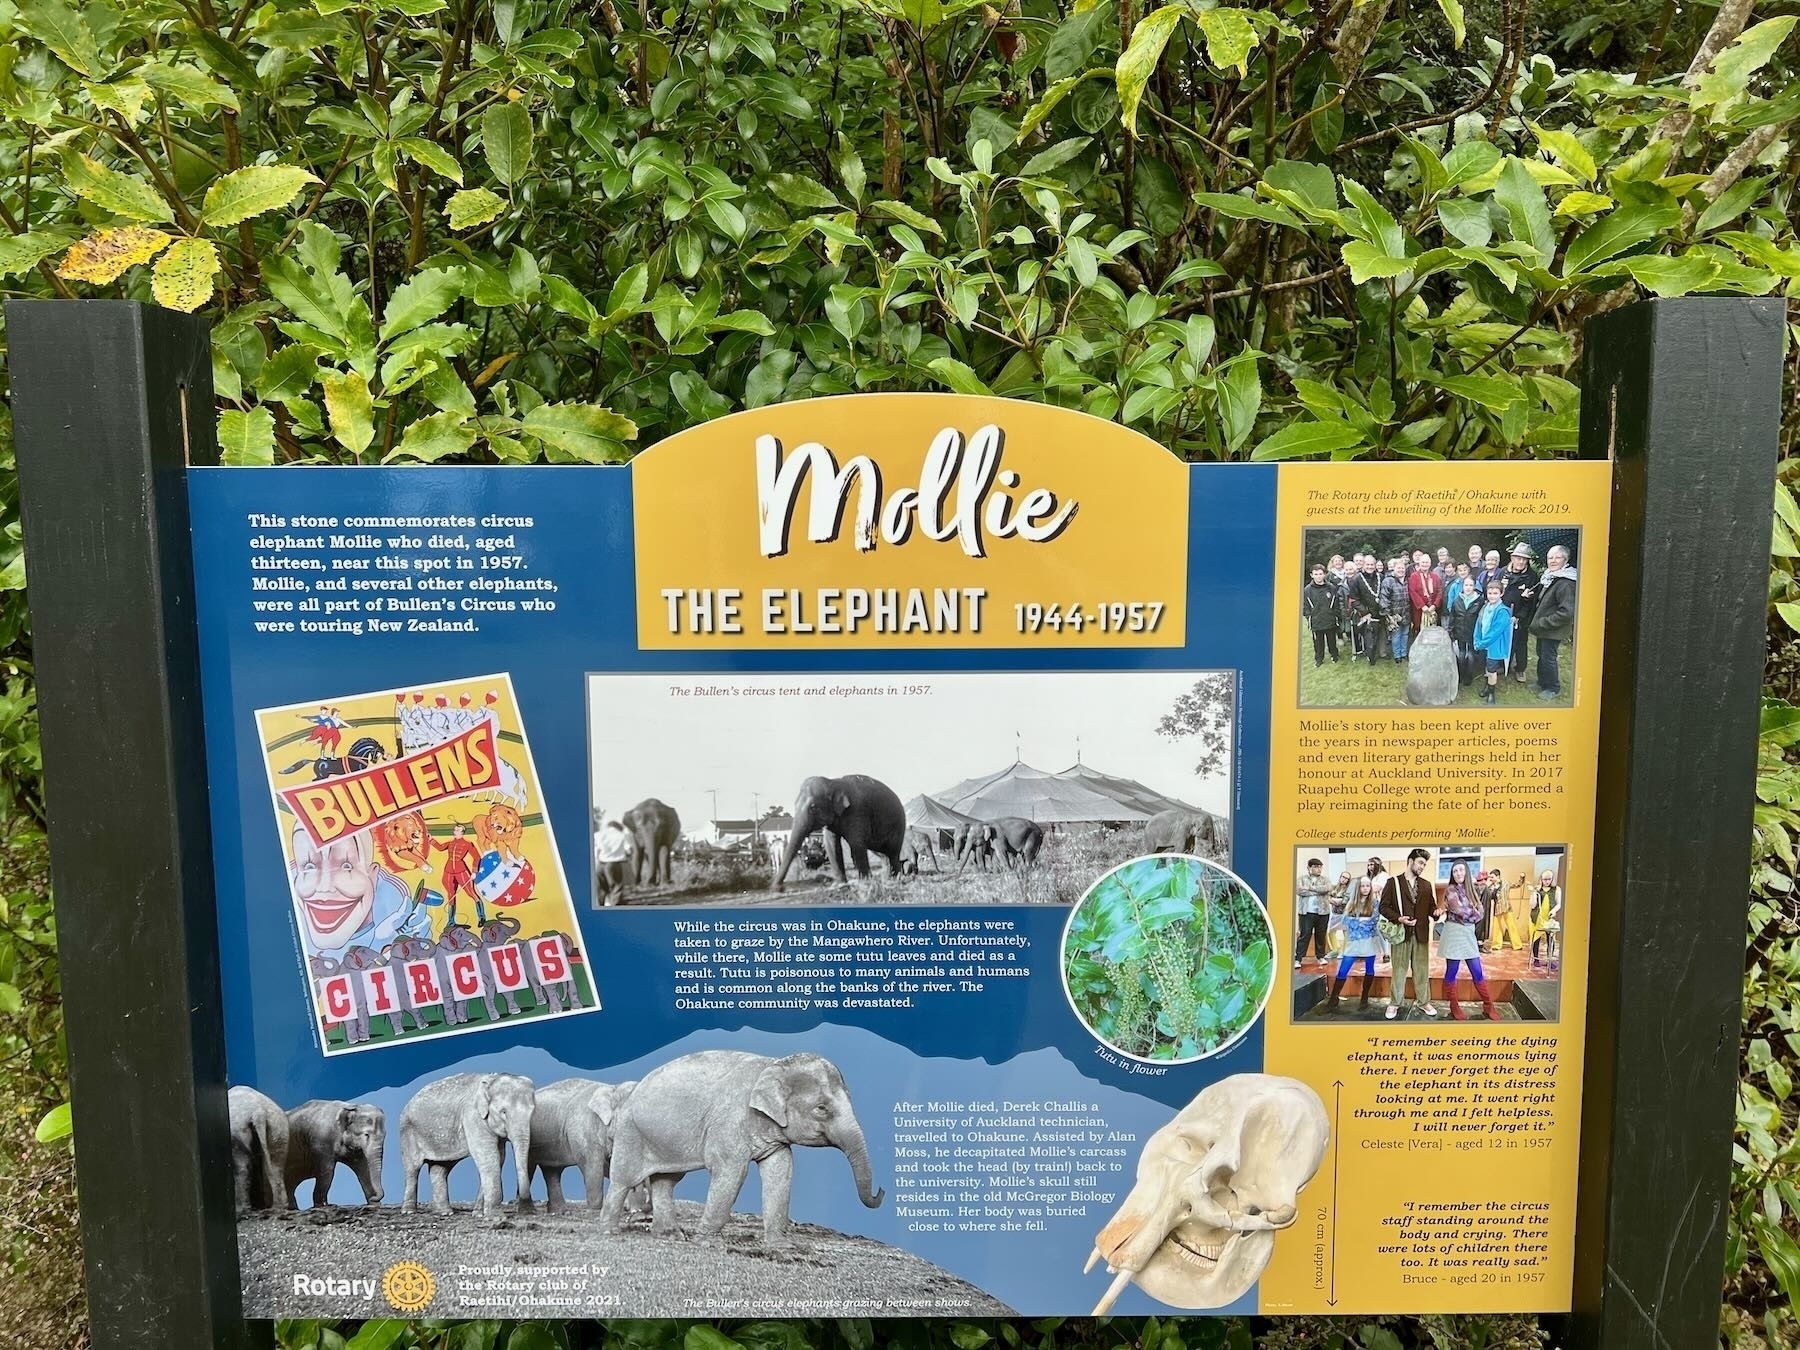 Iinfo sign: in memory of Mollie the elephant at Ohakune. 